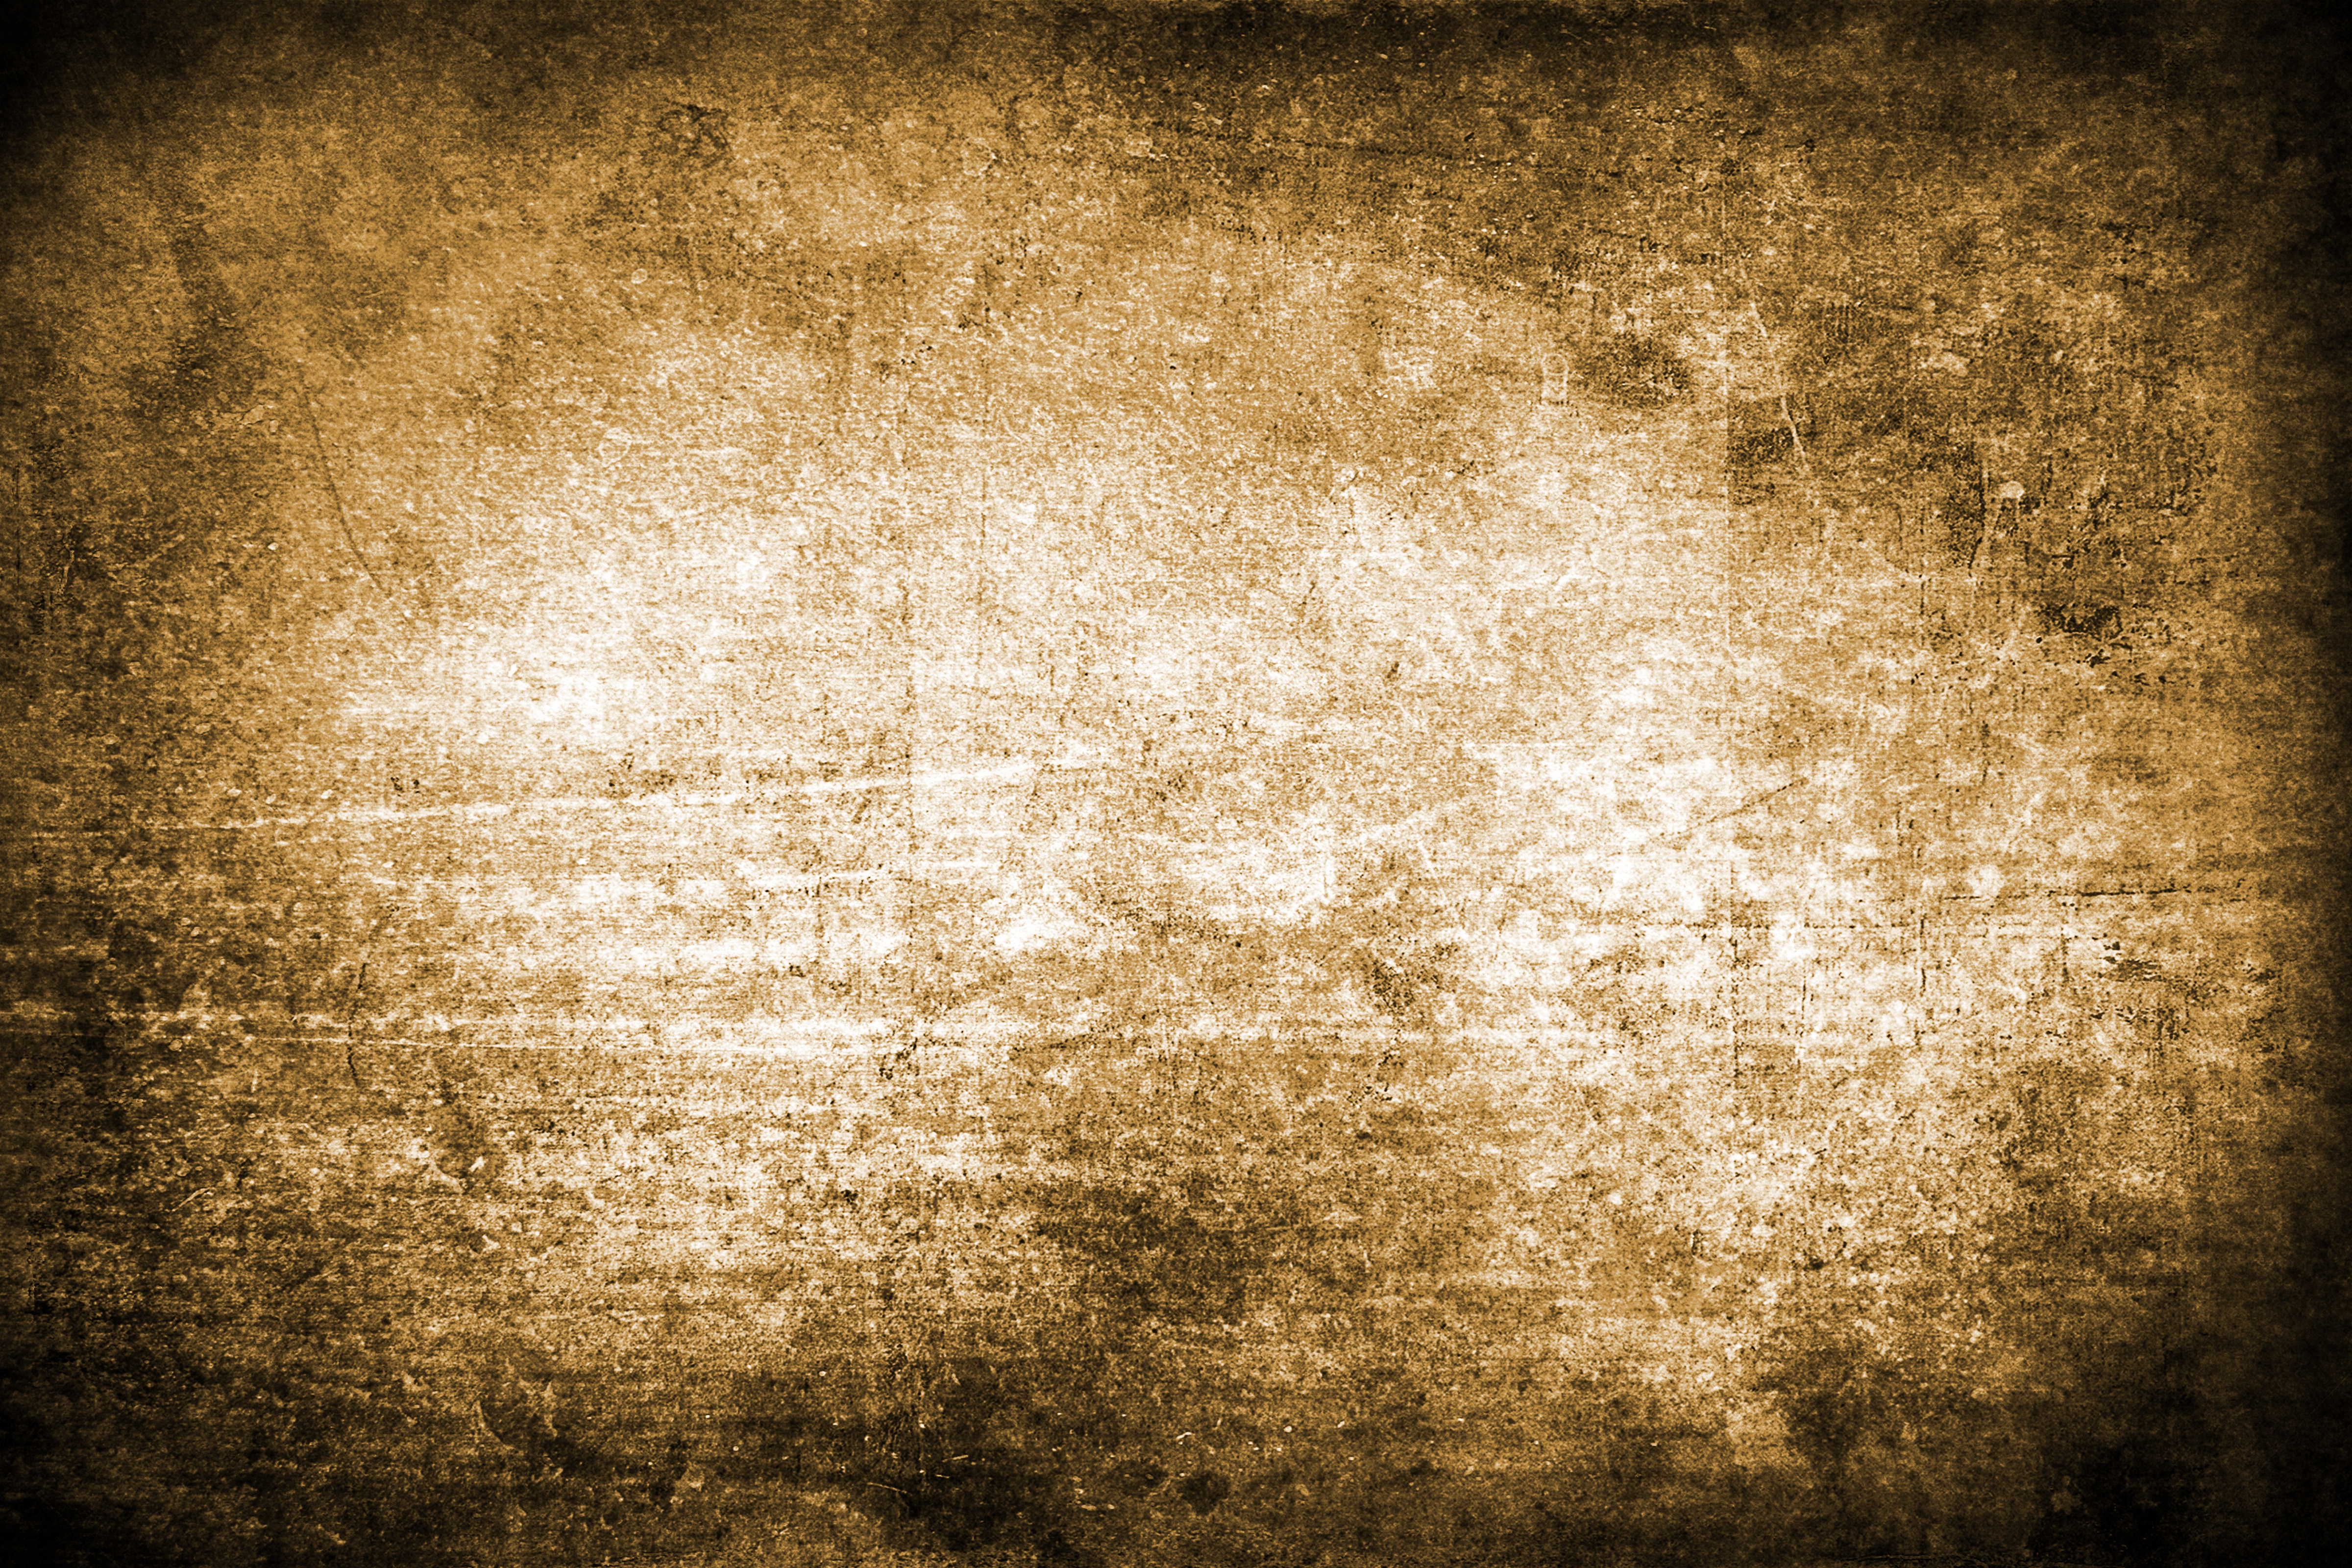 High Resolution Grungy Sepia Toned Textures That I Created From